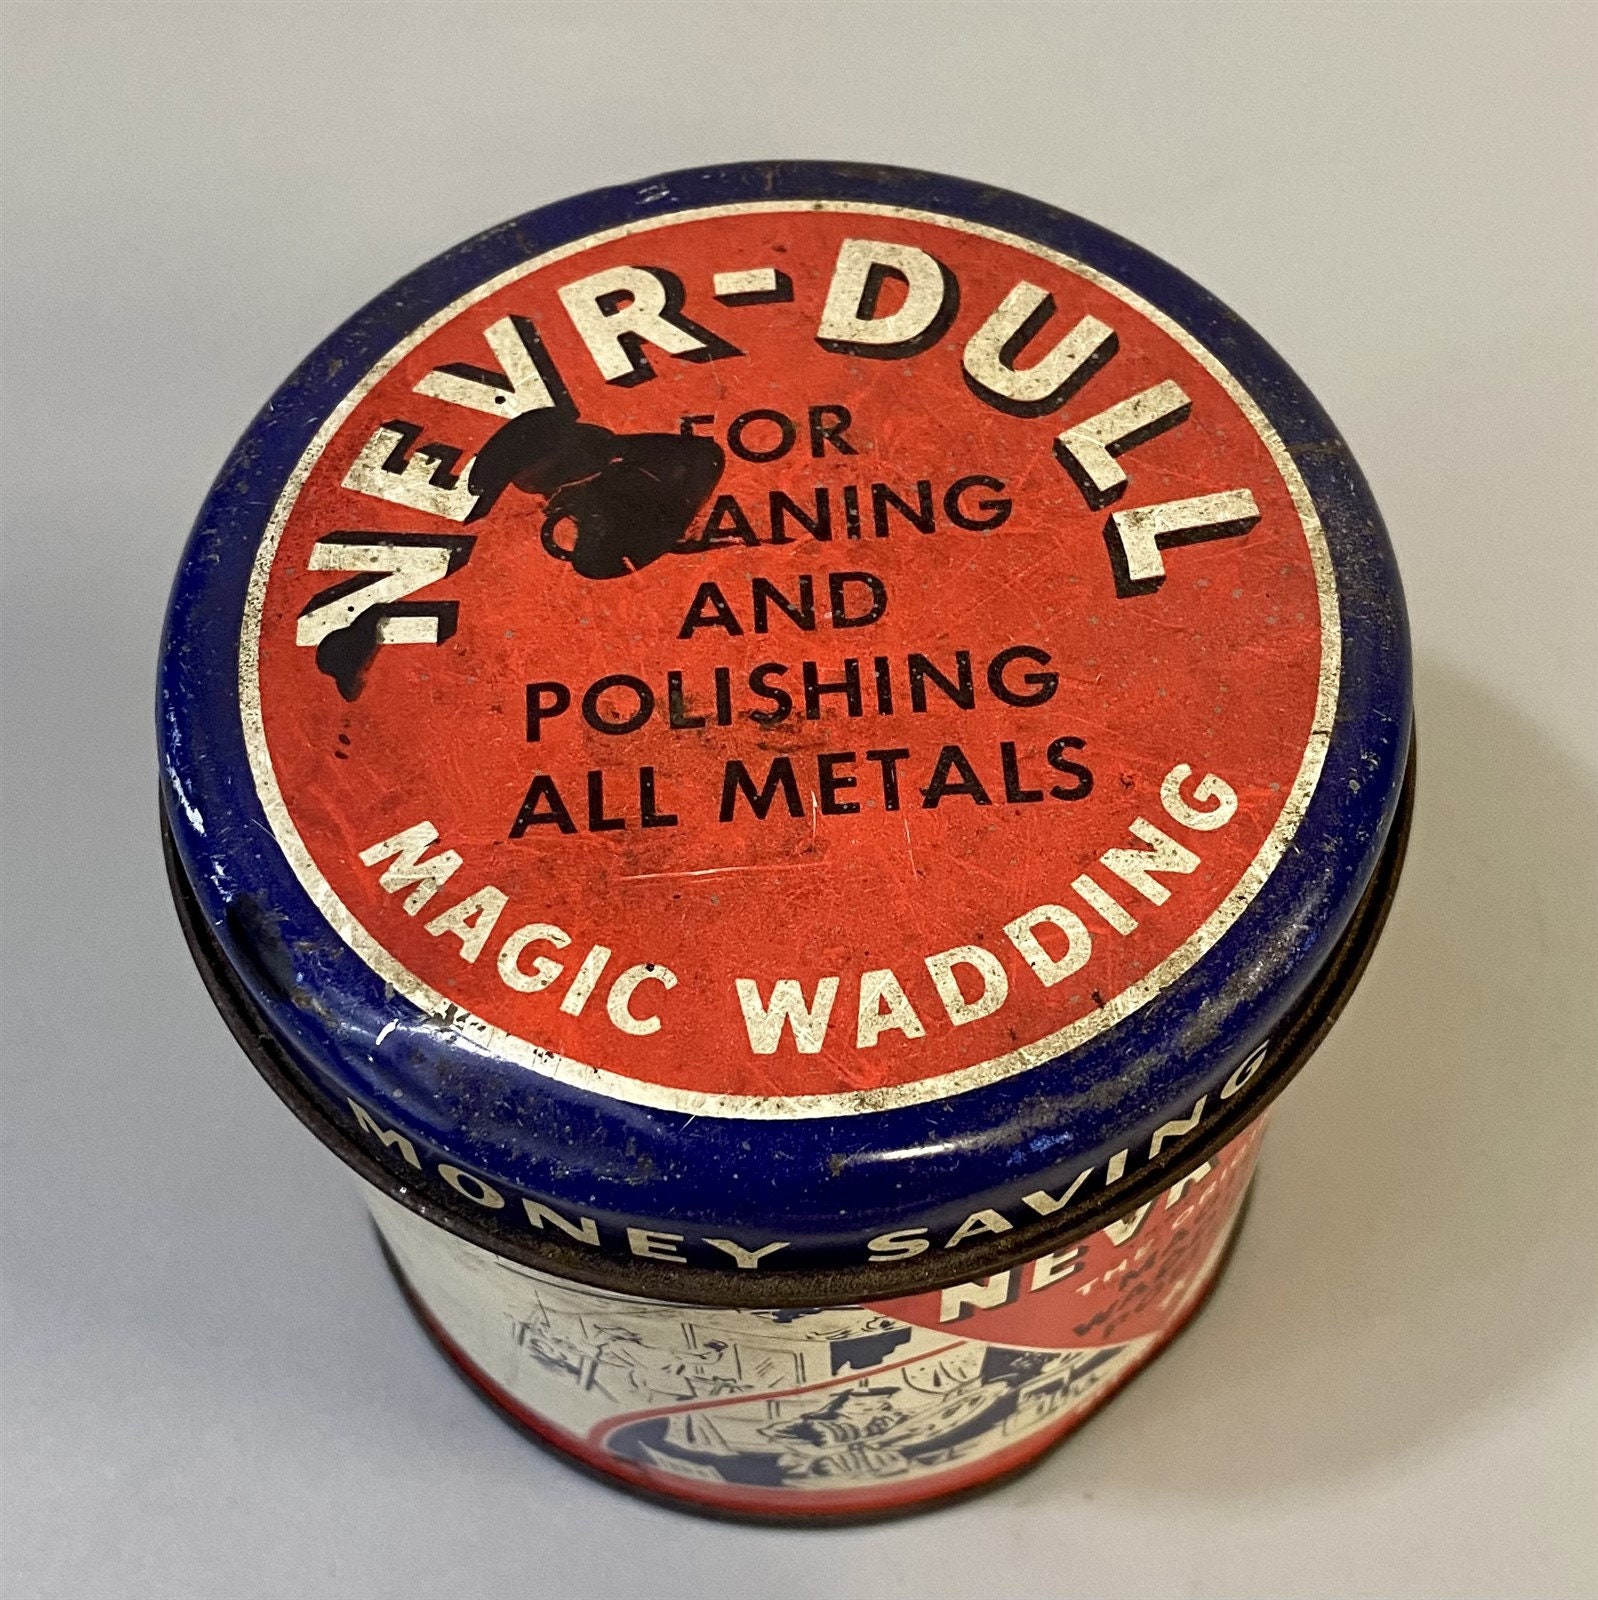 5oz Vintage Can of Nevr Dull Magic Wadding Polish by George Basch